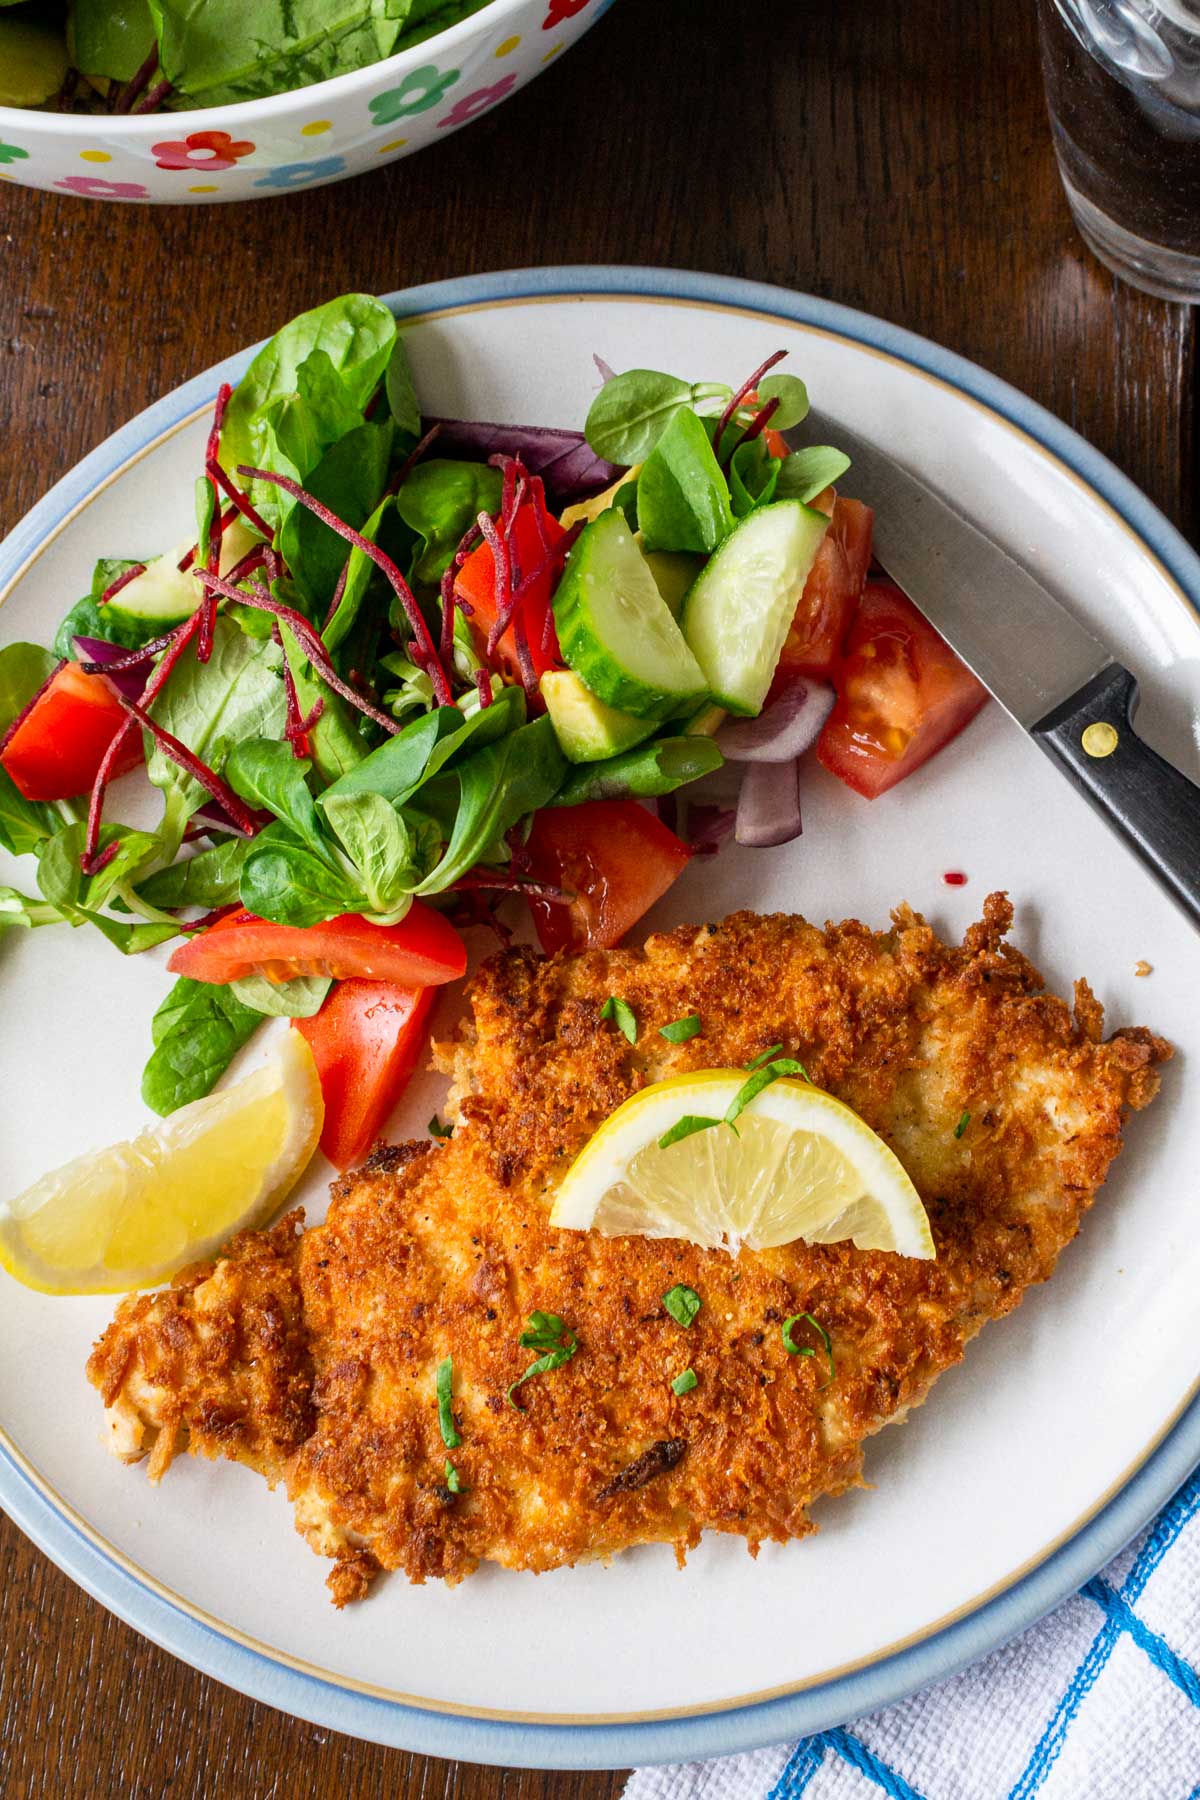 A crispy looking panko breadcrumbs crusted chicken breast on a plate with a blue rim from above with a simple side salad on the plate and with blue and white checked tea towel below on a wooden table.